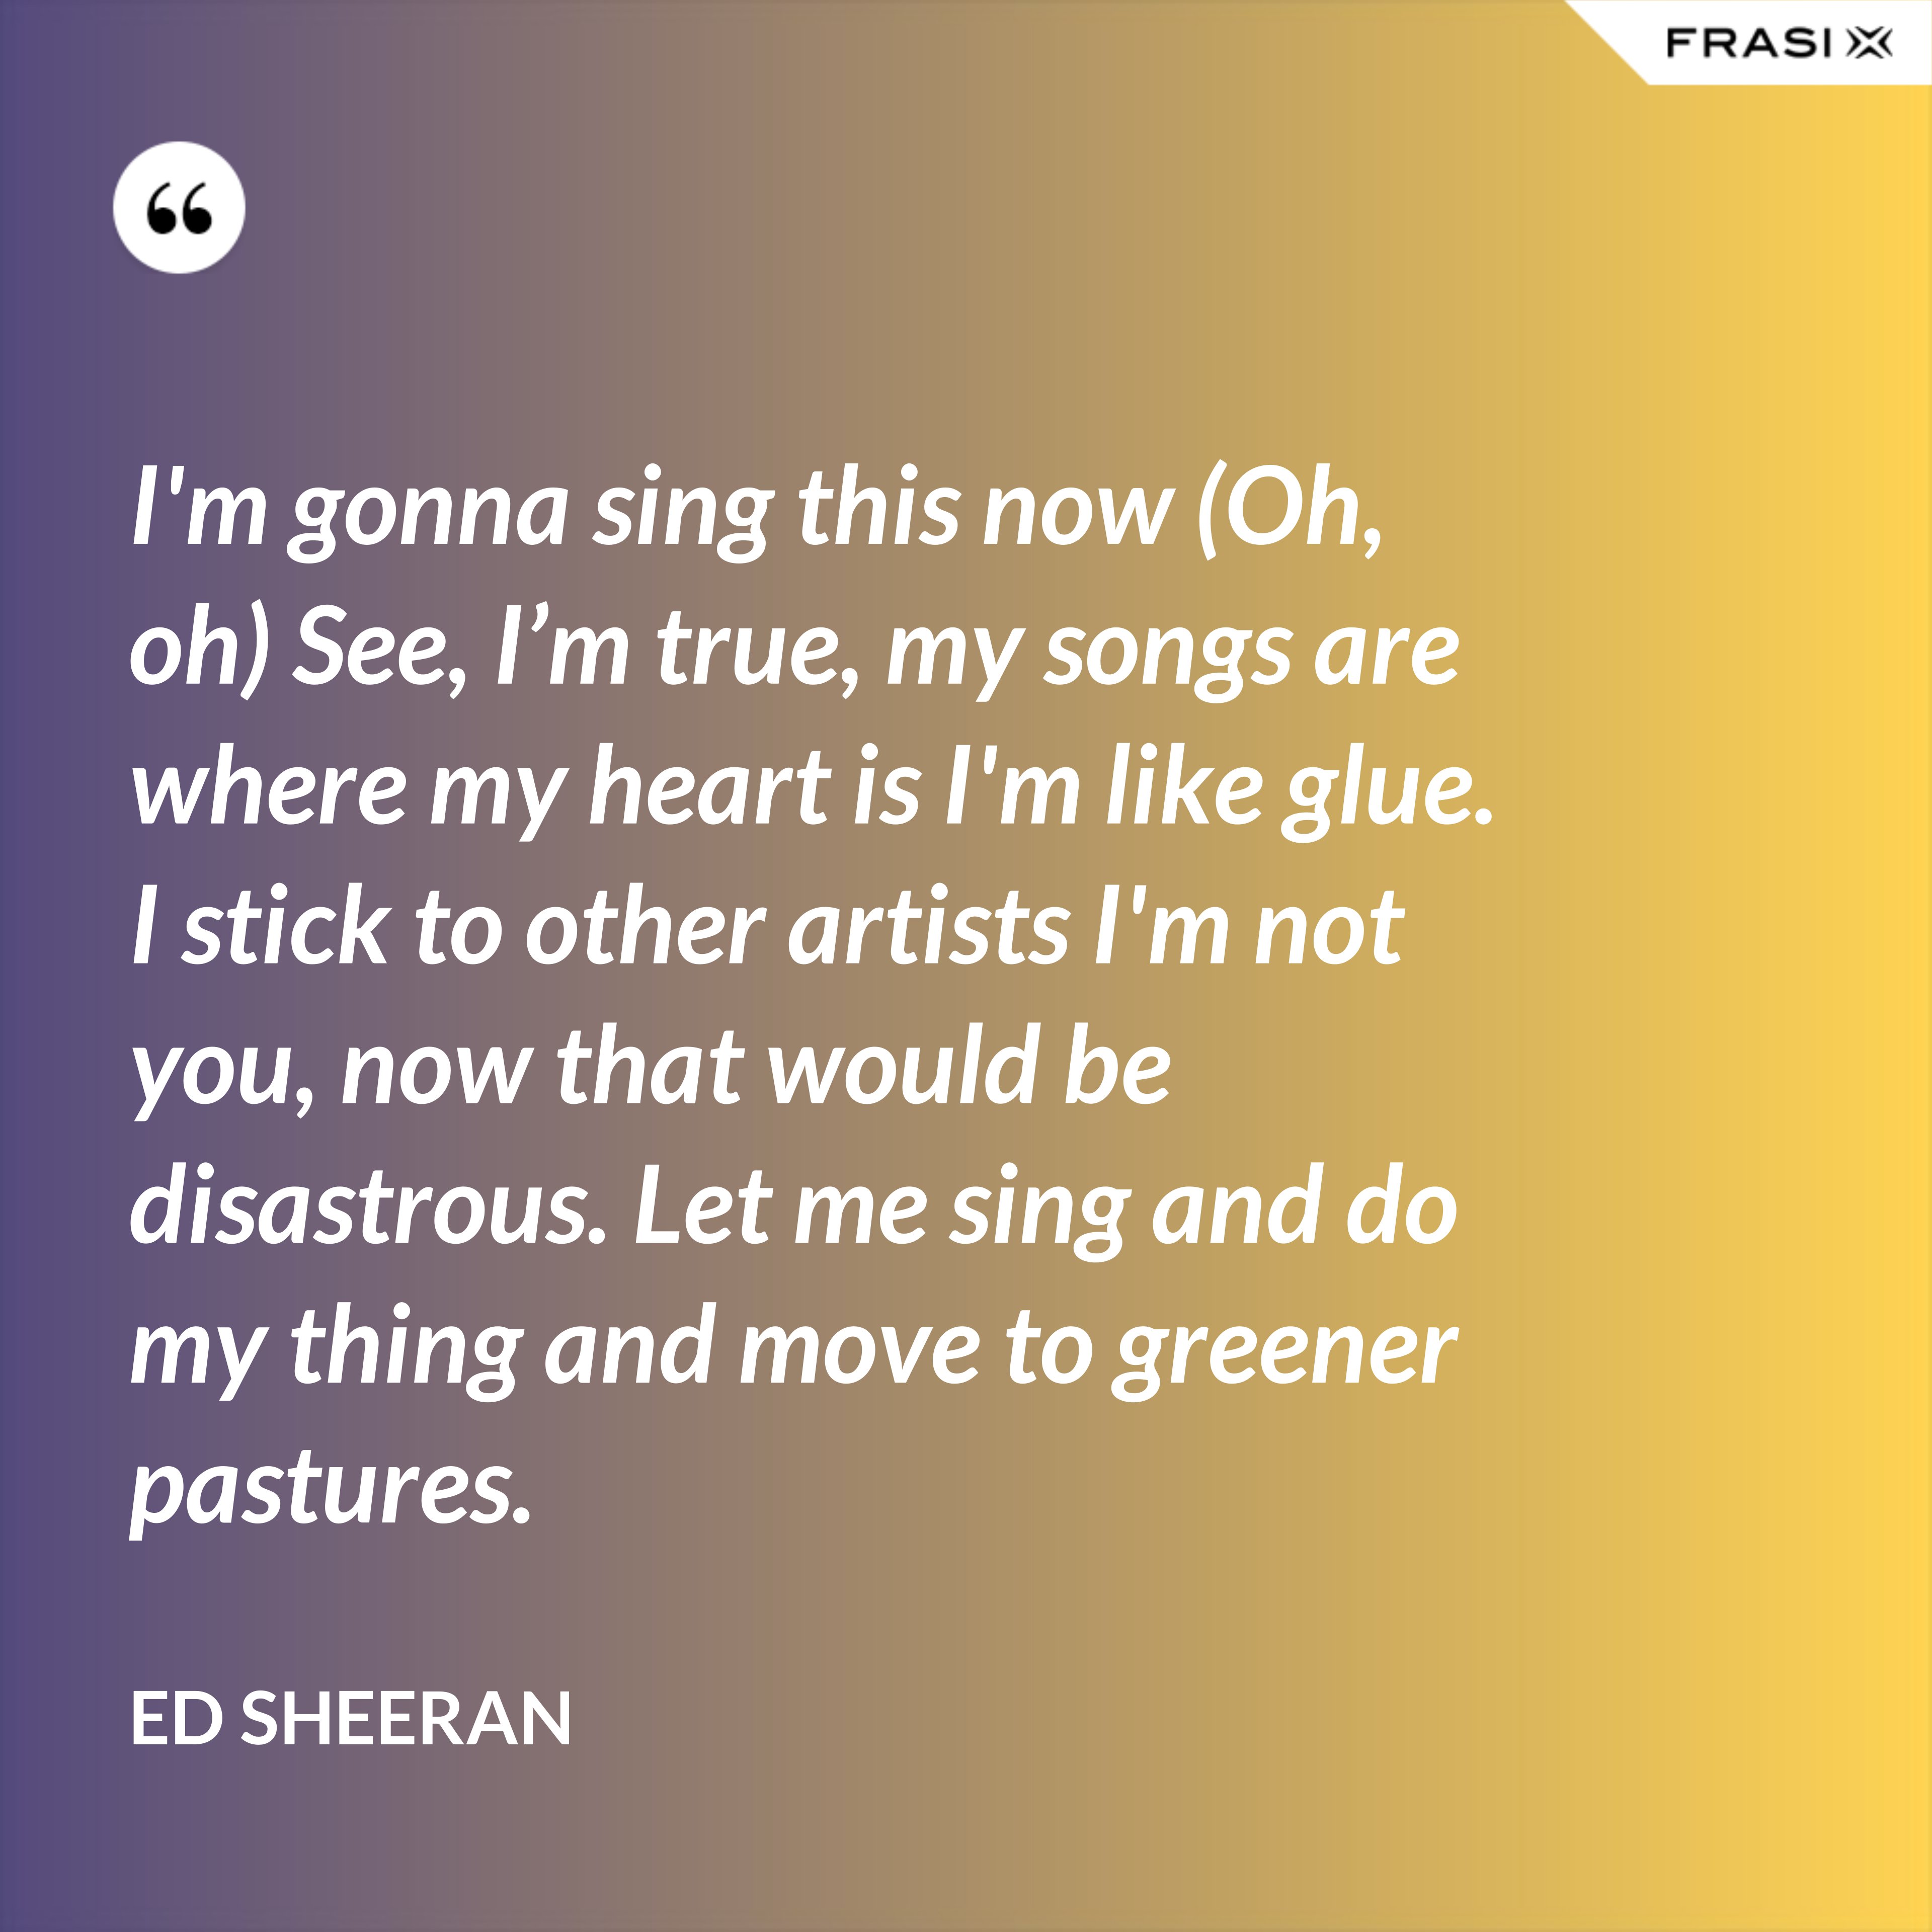 I'm gonna sing this now (Oh, oh) See, I’m true, my songs are where my heart is I'm like glue. I stick to other artists I'm not you, now that would be disastrous. Let me sing and do my thing and move to greener pastures. - Ed Sheeran